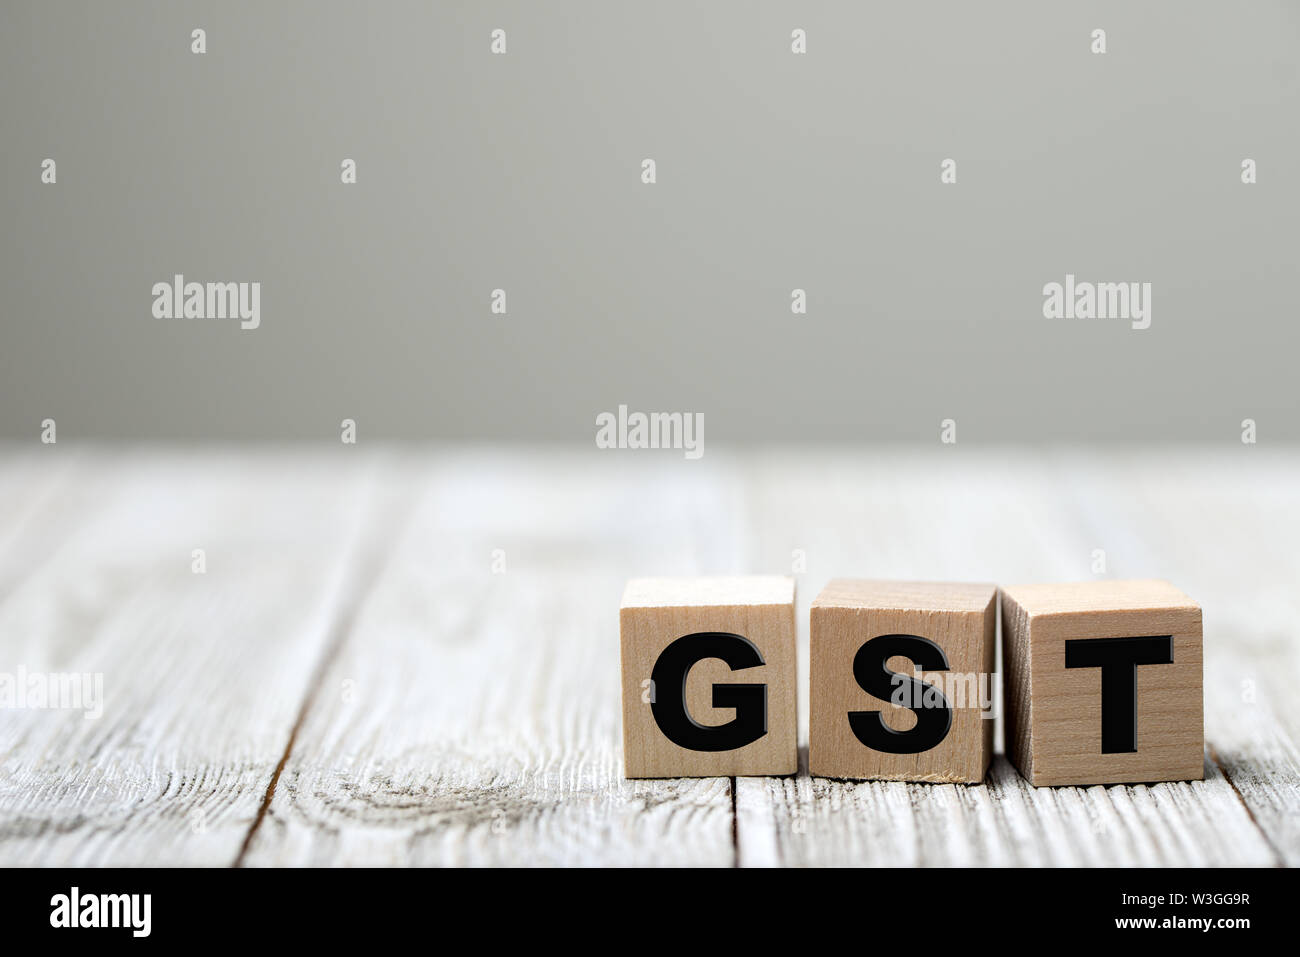 Business concept with a GST word Stock Photo